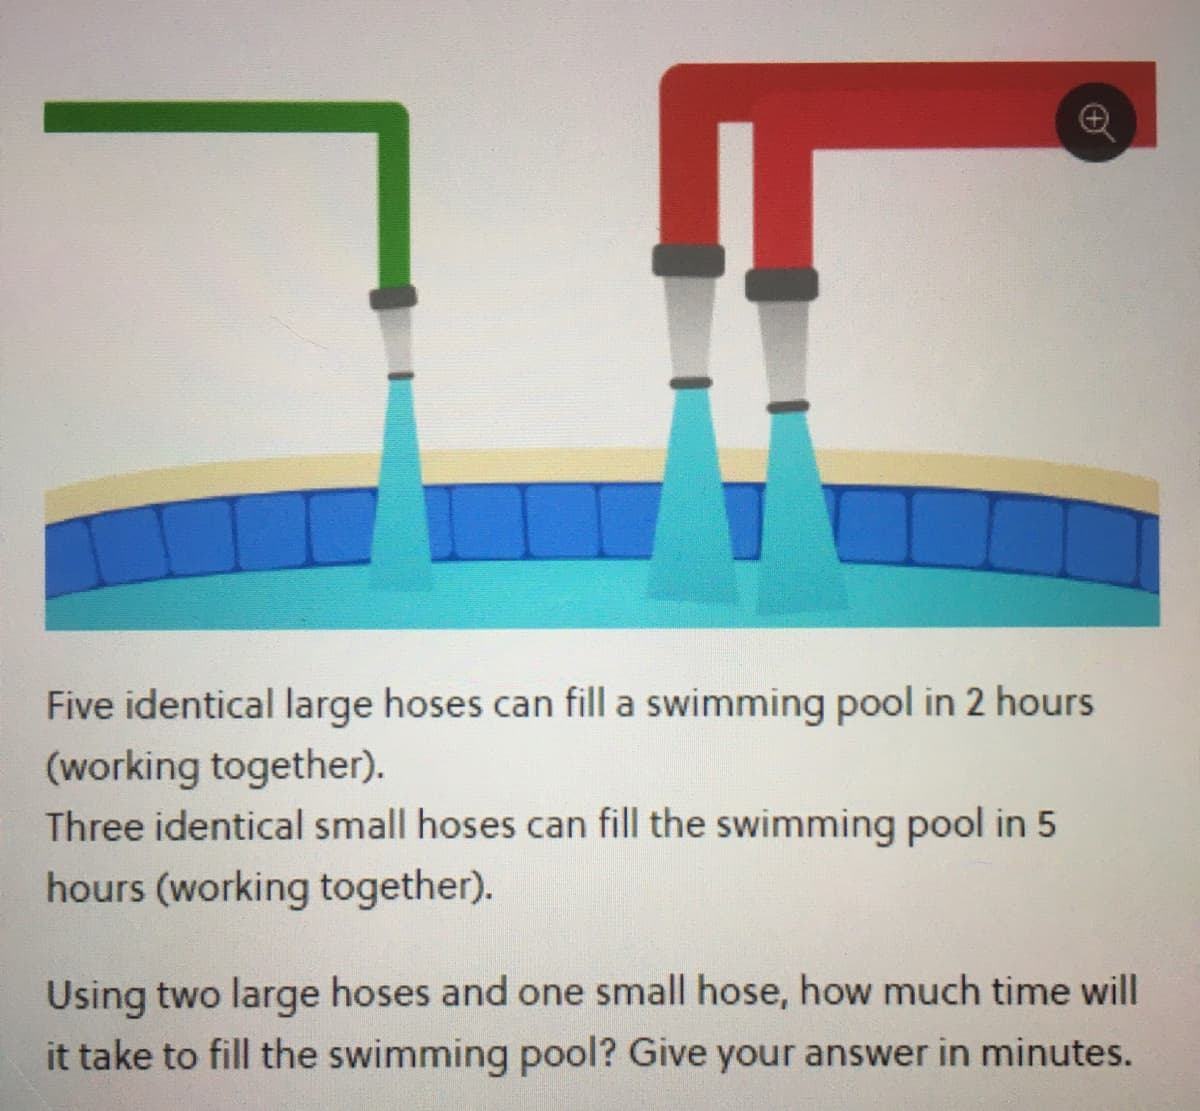 Five identical large hoses can fill a swimming pool in 2 hours
(working together).
Three identical small hoses can fill the swimming pool in 5
hours (working together).
Using two large hoses and one small hose, how much time will
it take to fill the swimming pool? Give your answer in minutes.
